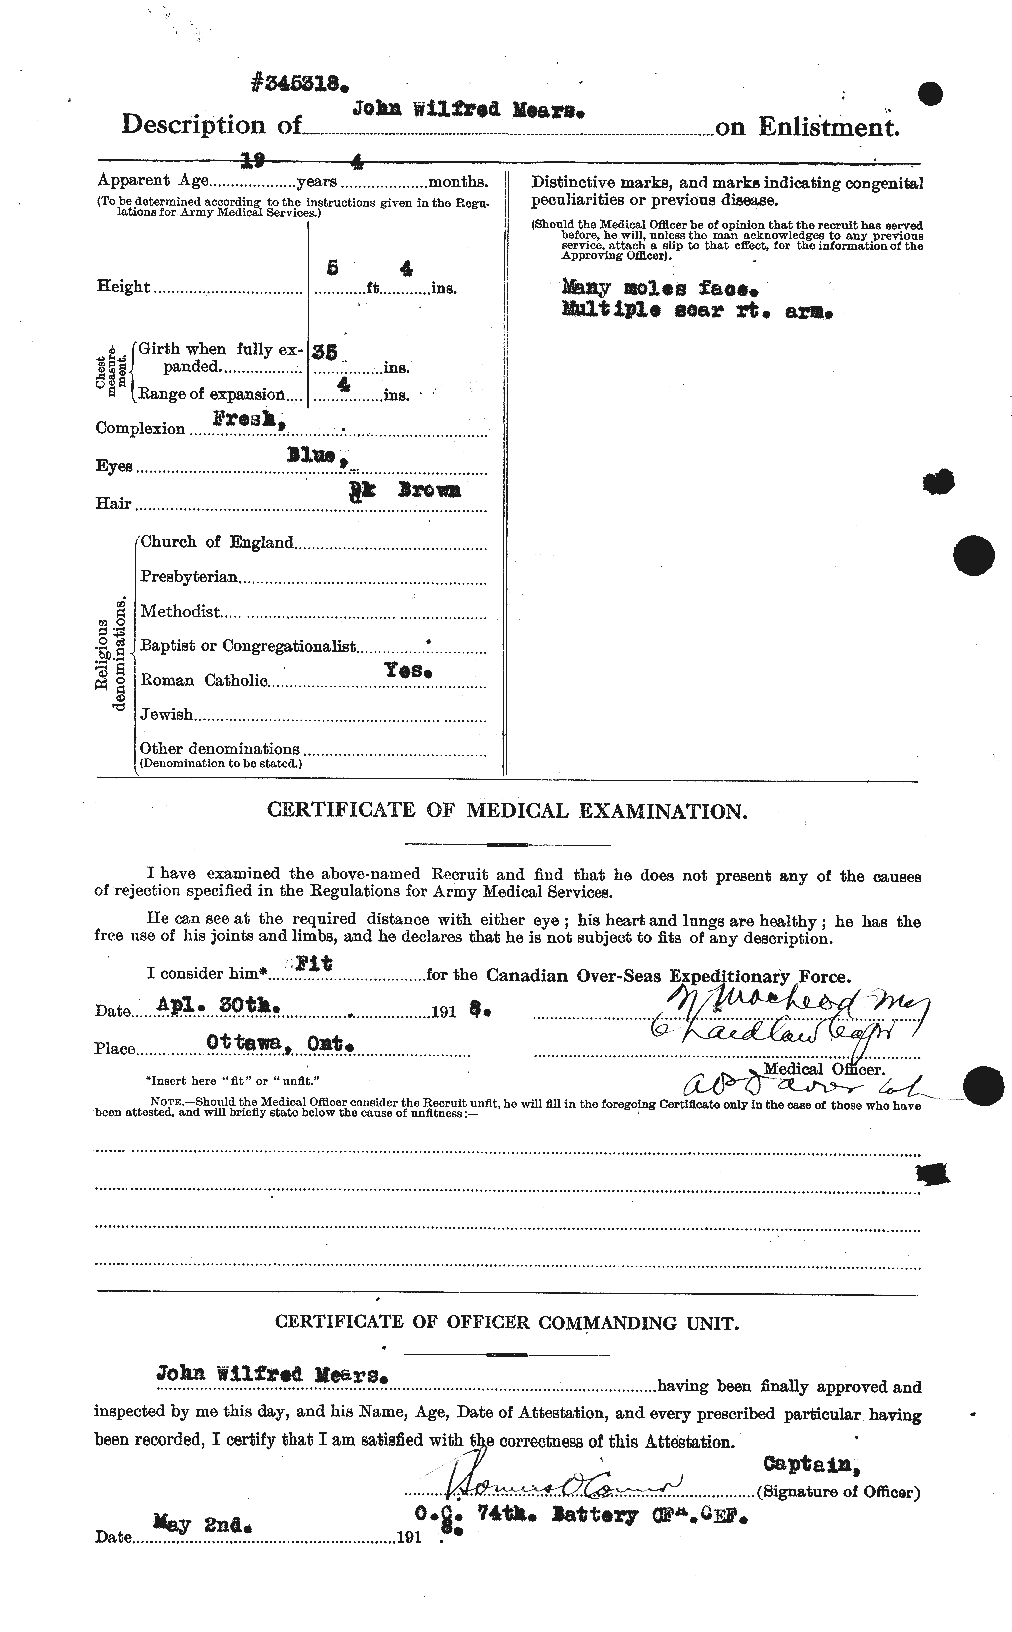 Personnel Records of the First World War - CEF 489703b